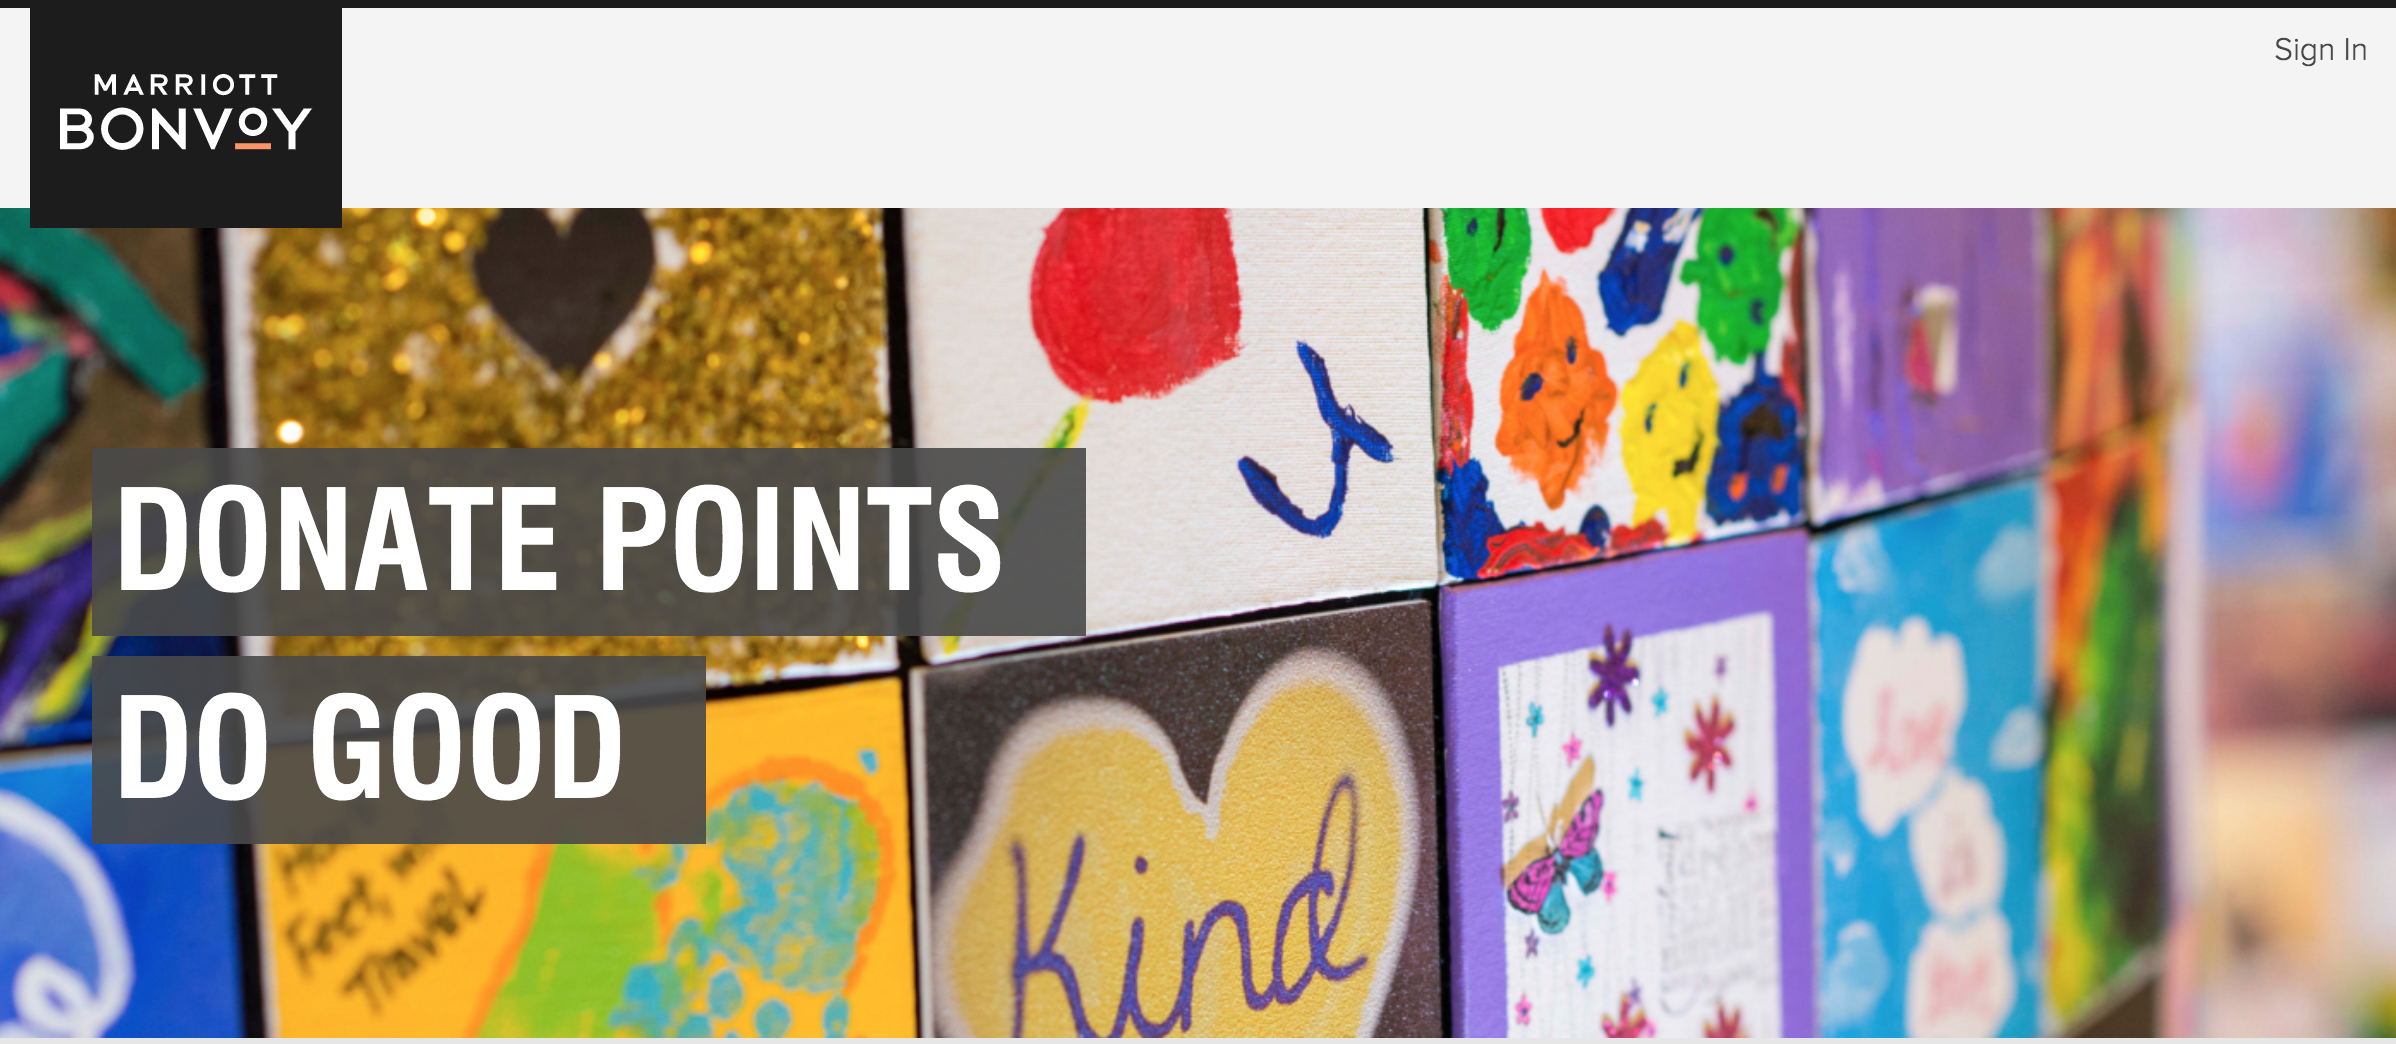 donate points to keep your marriott account active so your marriott points do not expire